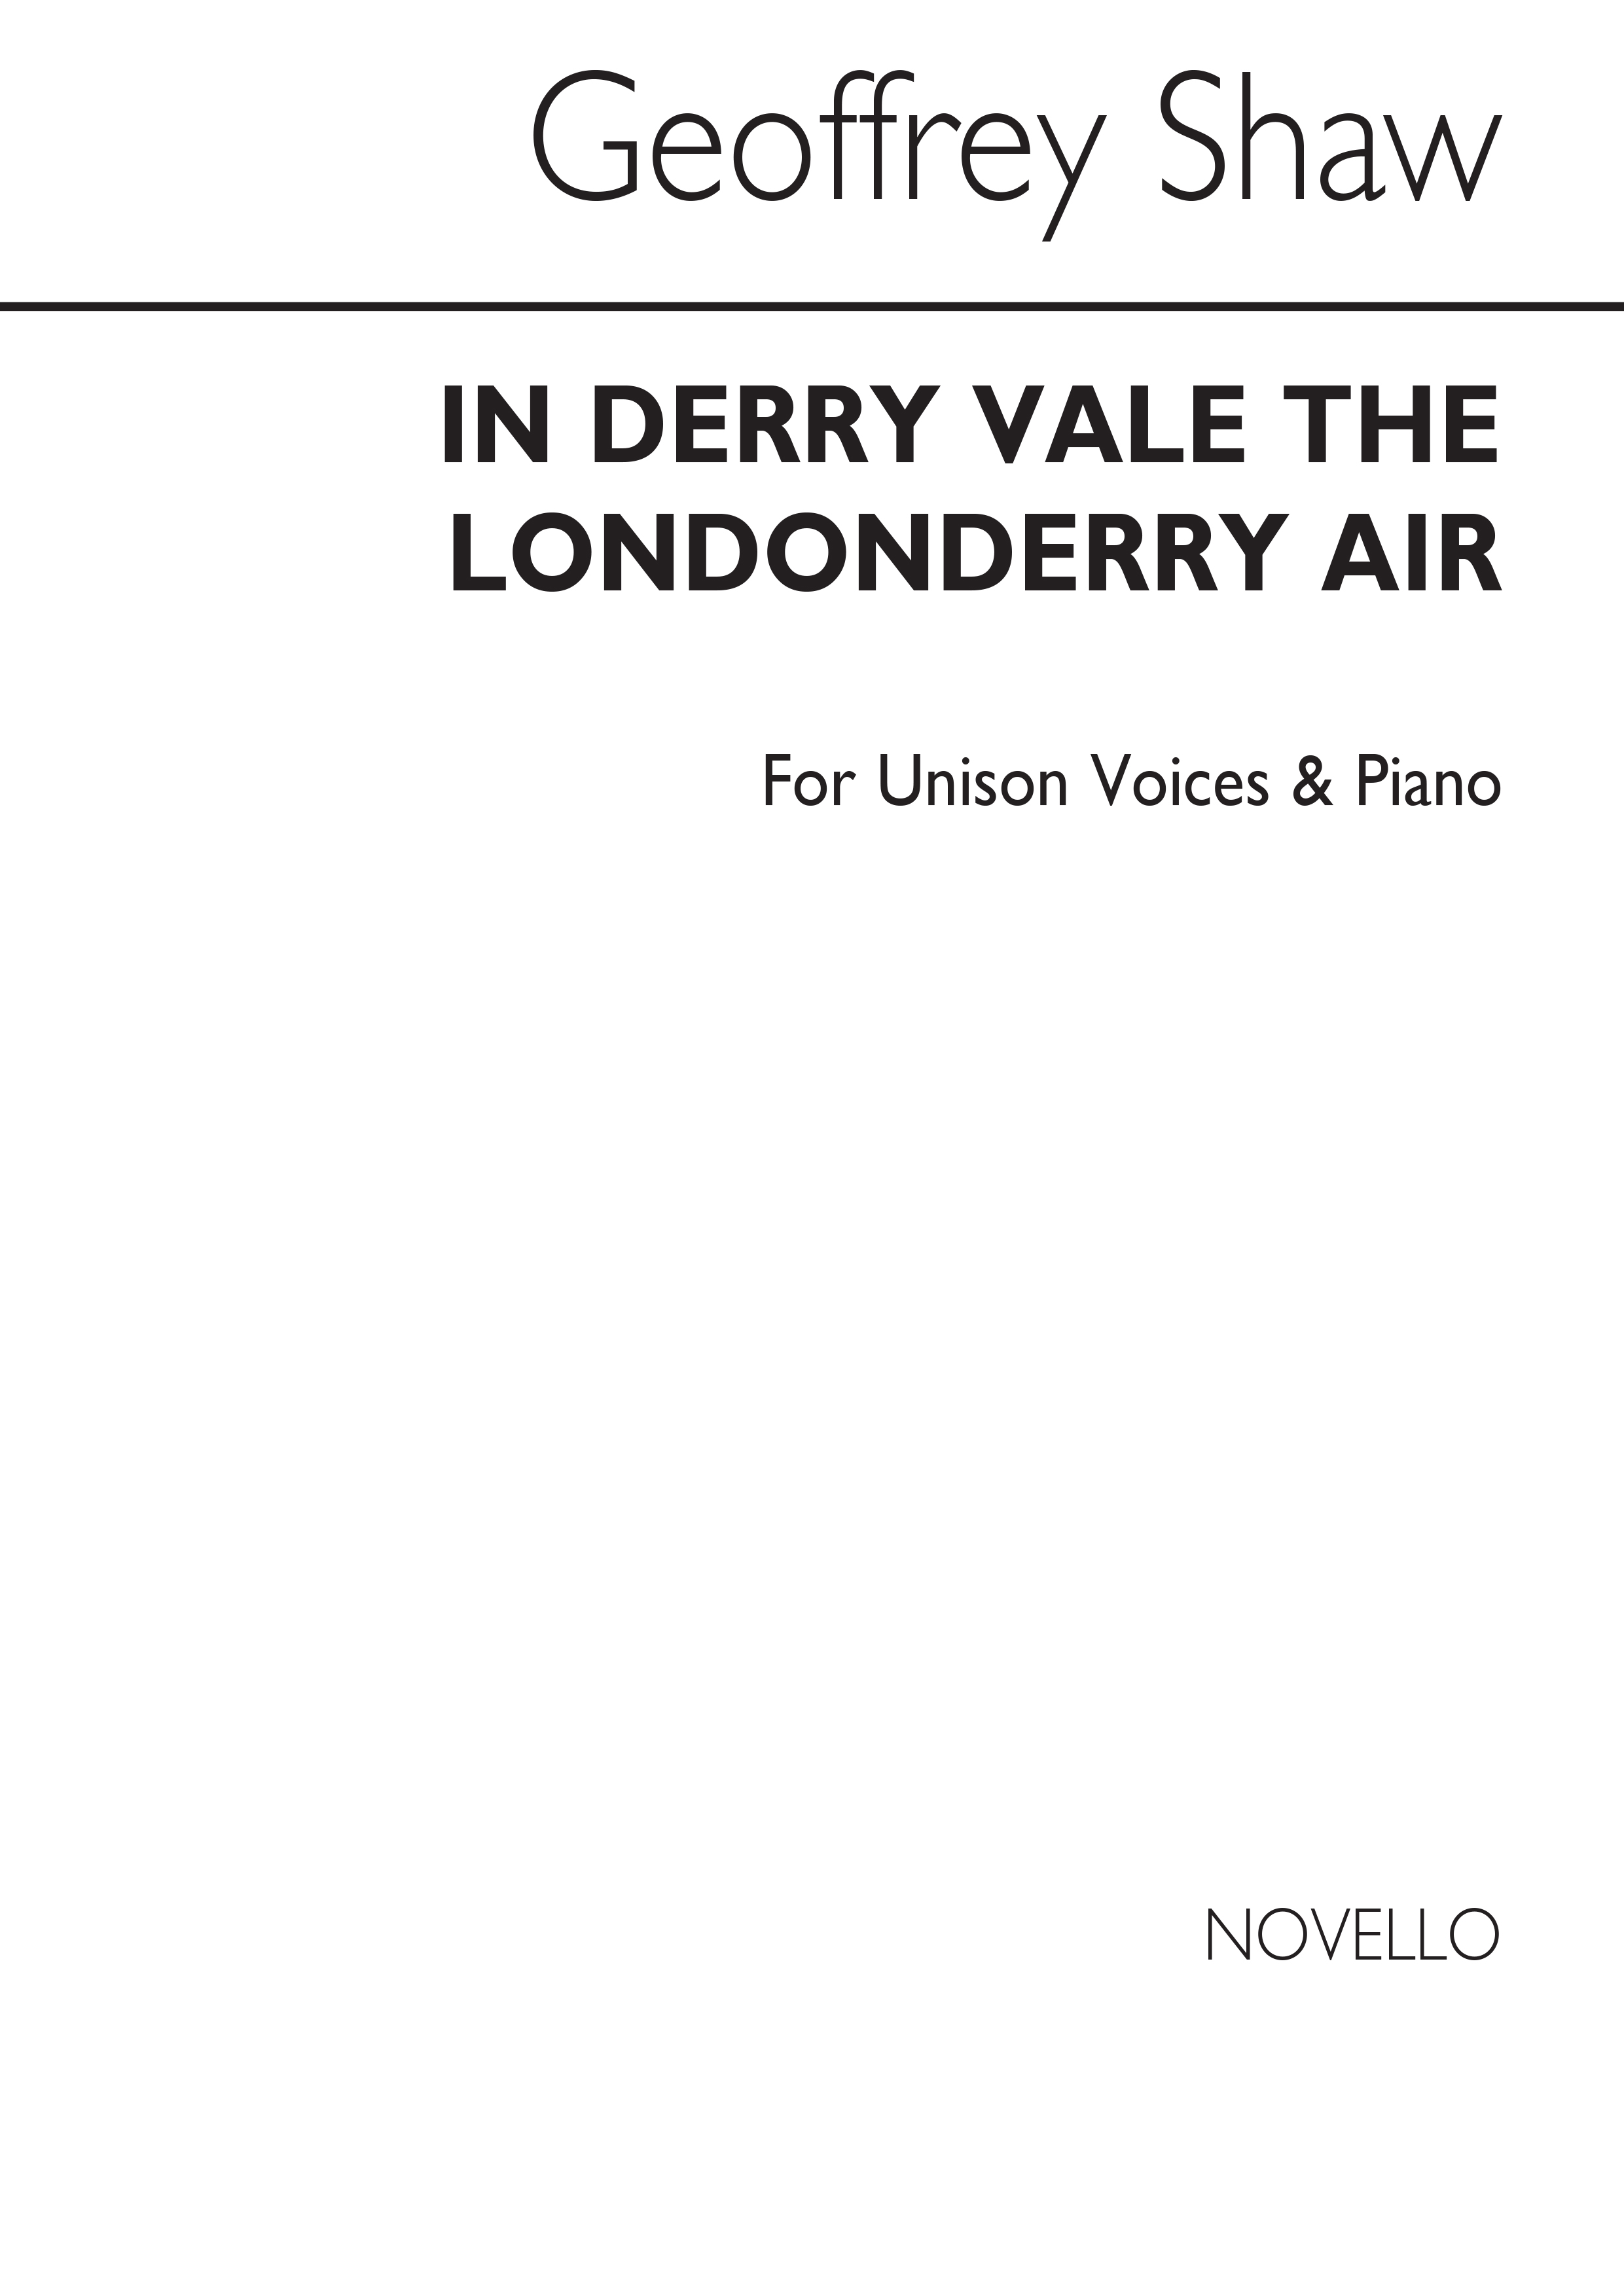 Geoffrey Shaw: In Derry Vale (The Londonderry Air) Unison With Descant/Piano